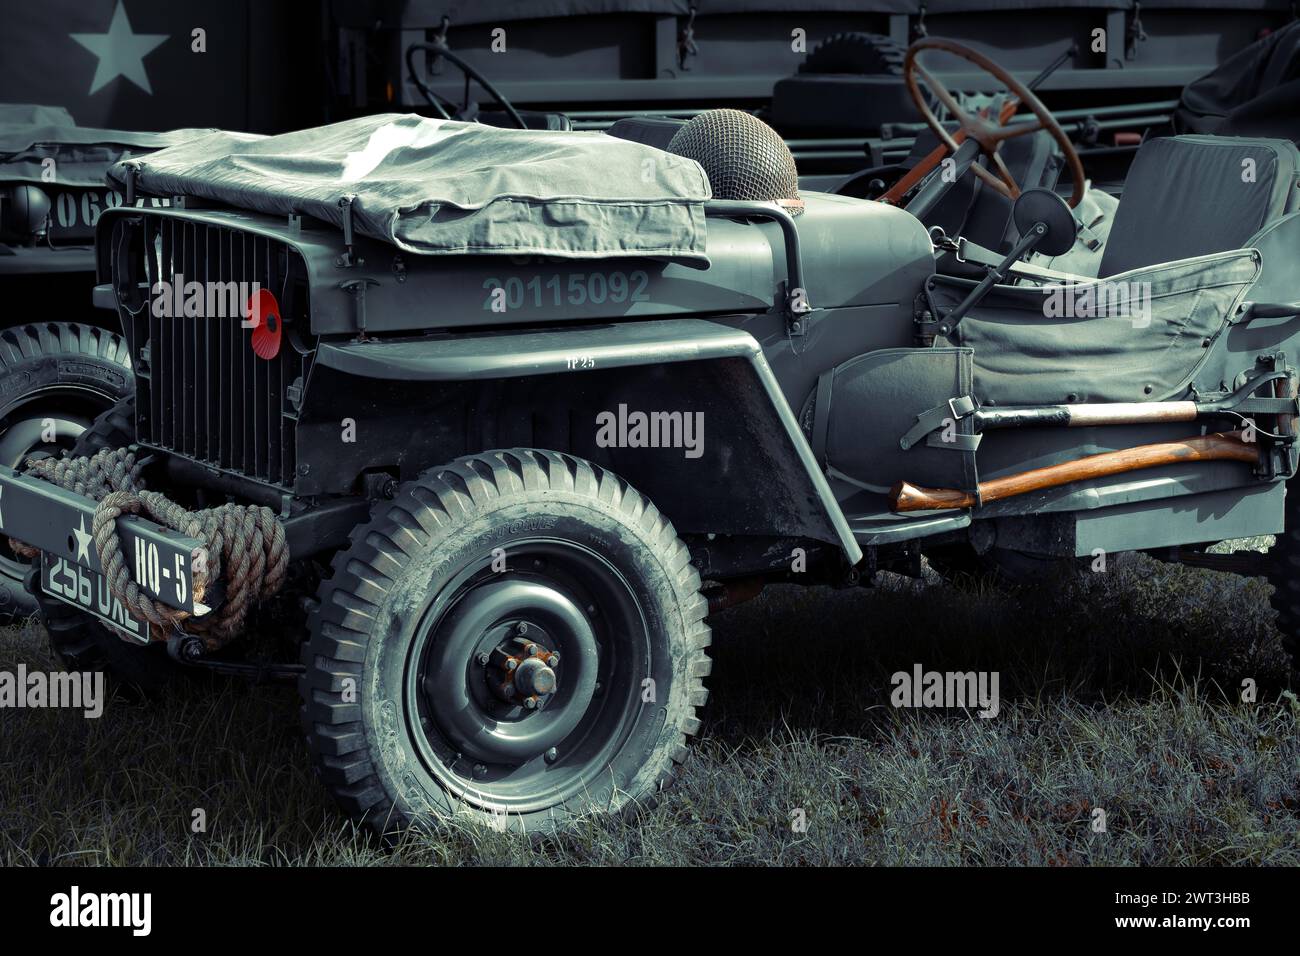 US army World War 2 jeep fully kitted out with equipment Stock Photo